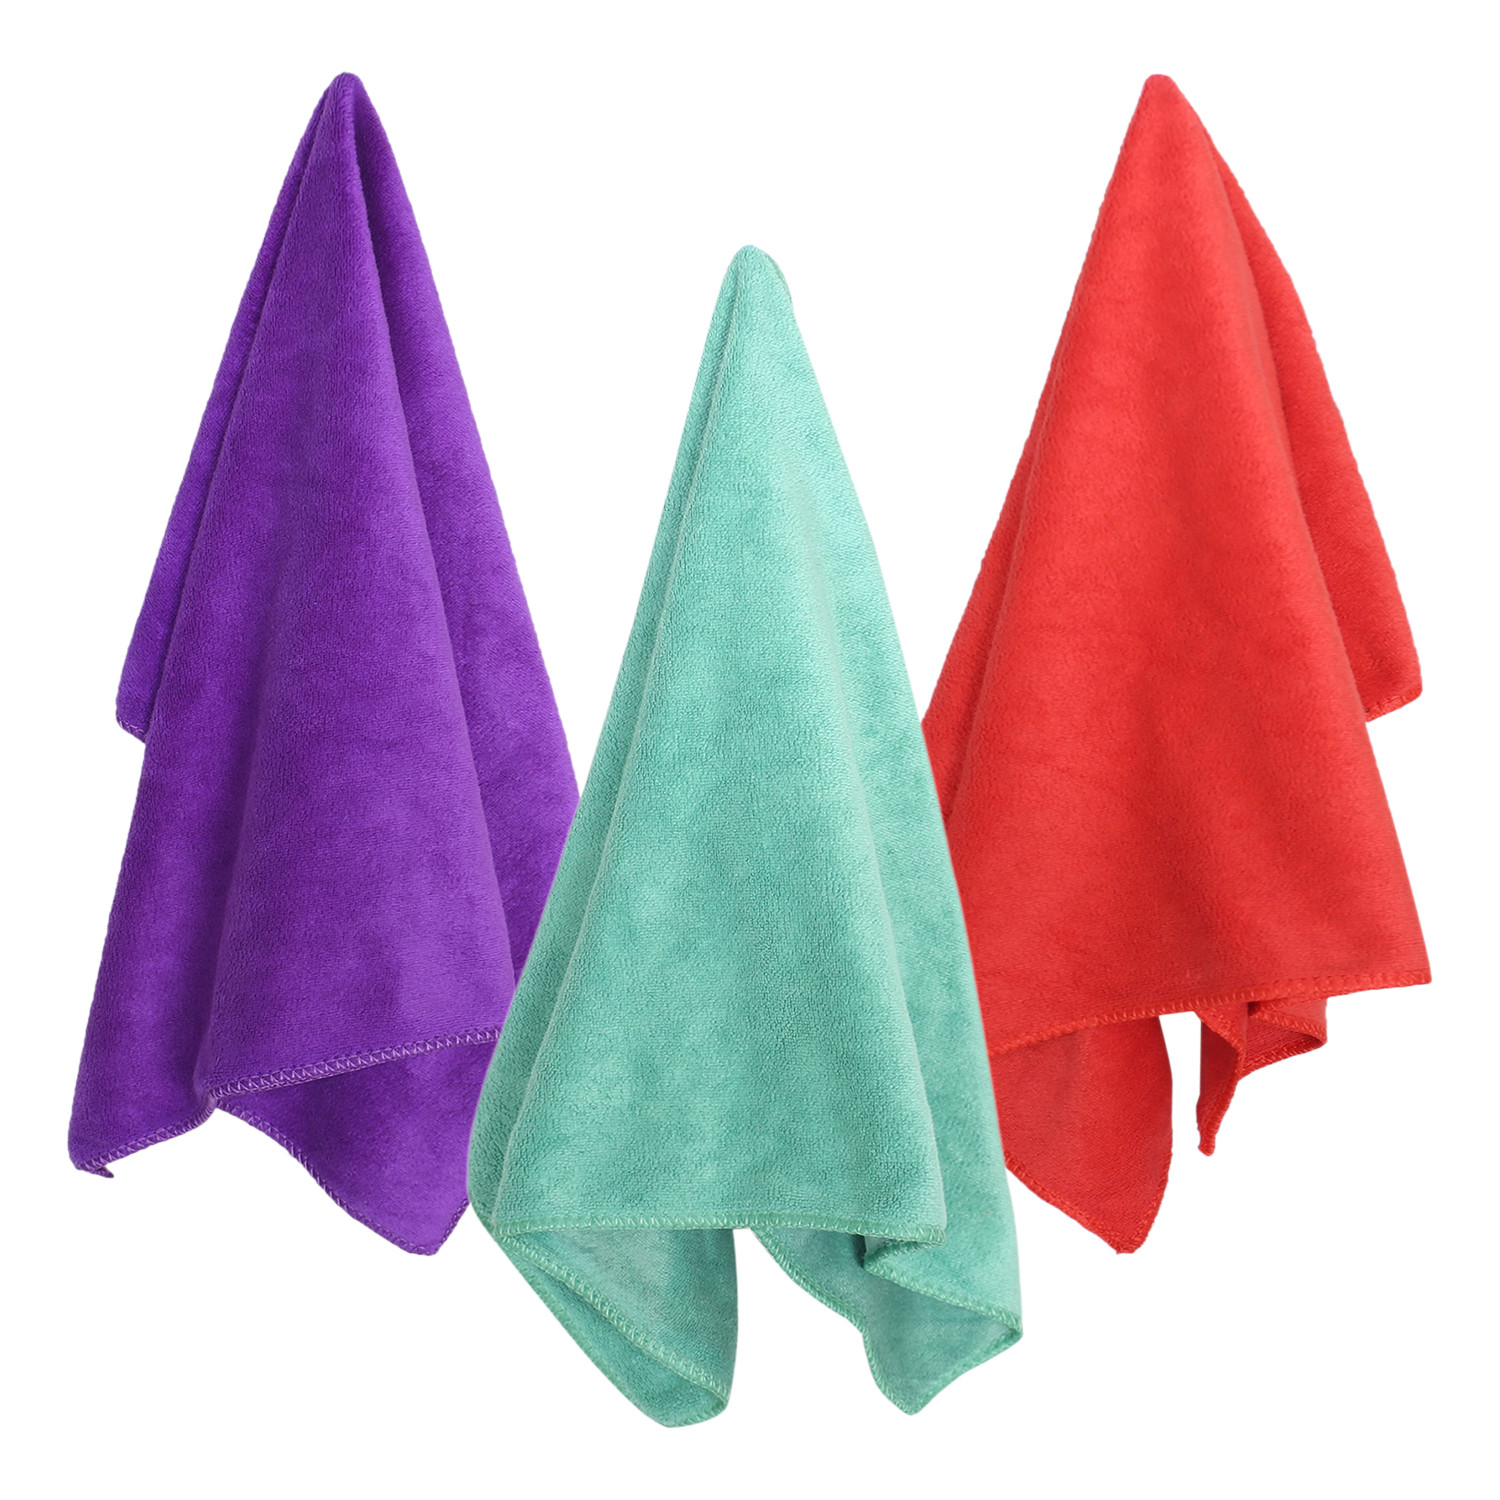 Kuber Industries Cleaning Cloths|Microfiber Highly Absorbent Wash Towels for Kitchen,Car,Window,24 x 16 Inch,Pack of 3 (Green,Red & Purple)